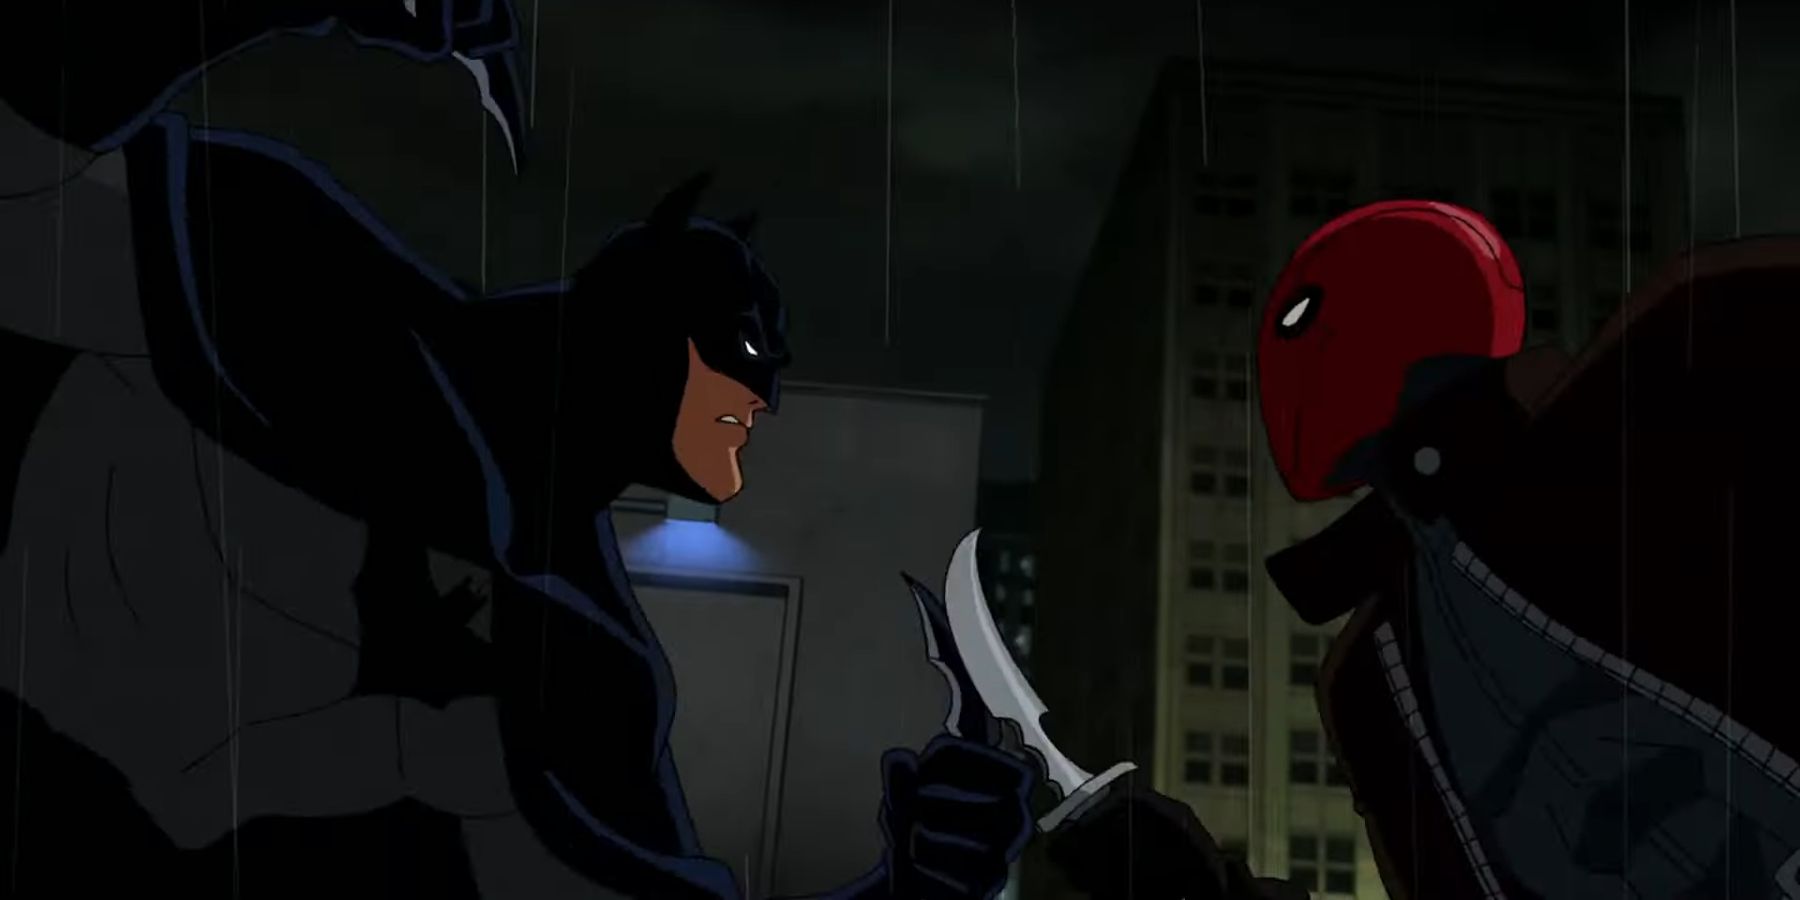 Batman and the Red Hood battling on a rooftop in Batman Under The Red Hood